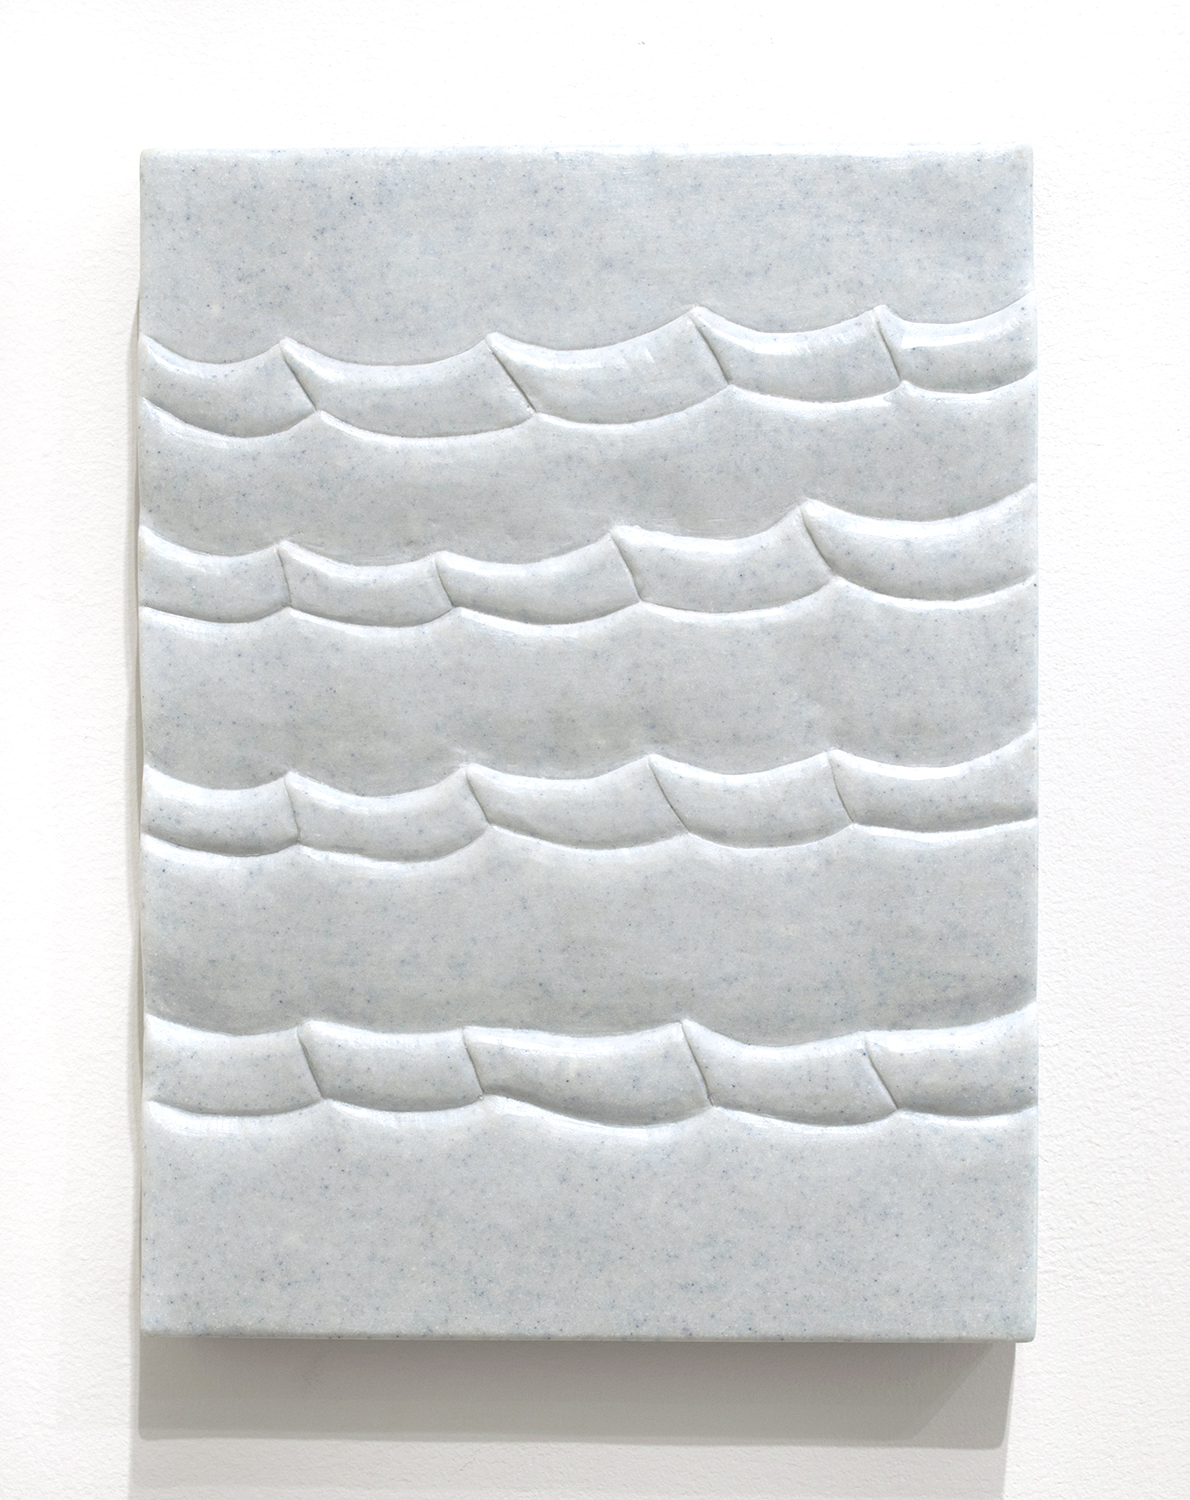   Sea Tablet (Galapagos),  2018  9 x 12 x 1.5 inches  Marble composite 